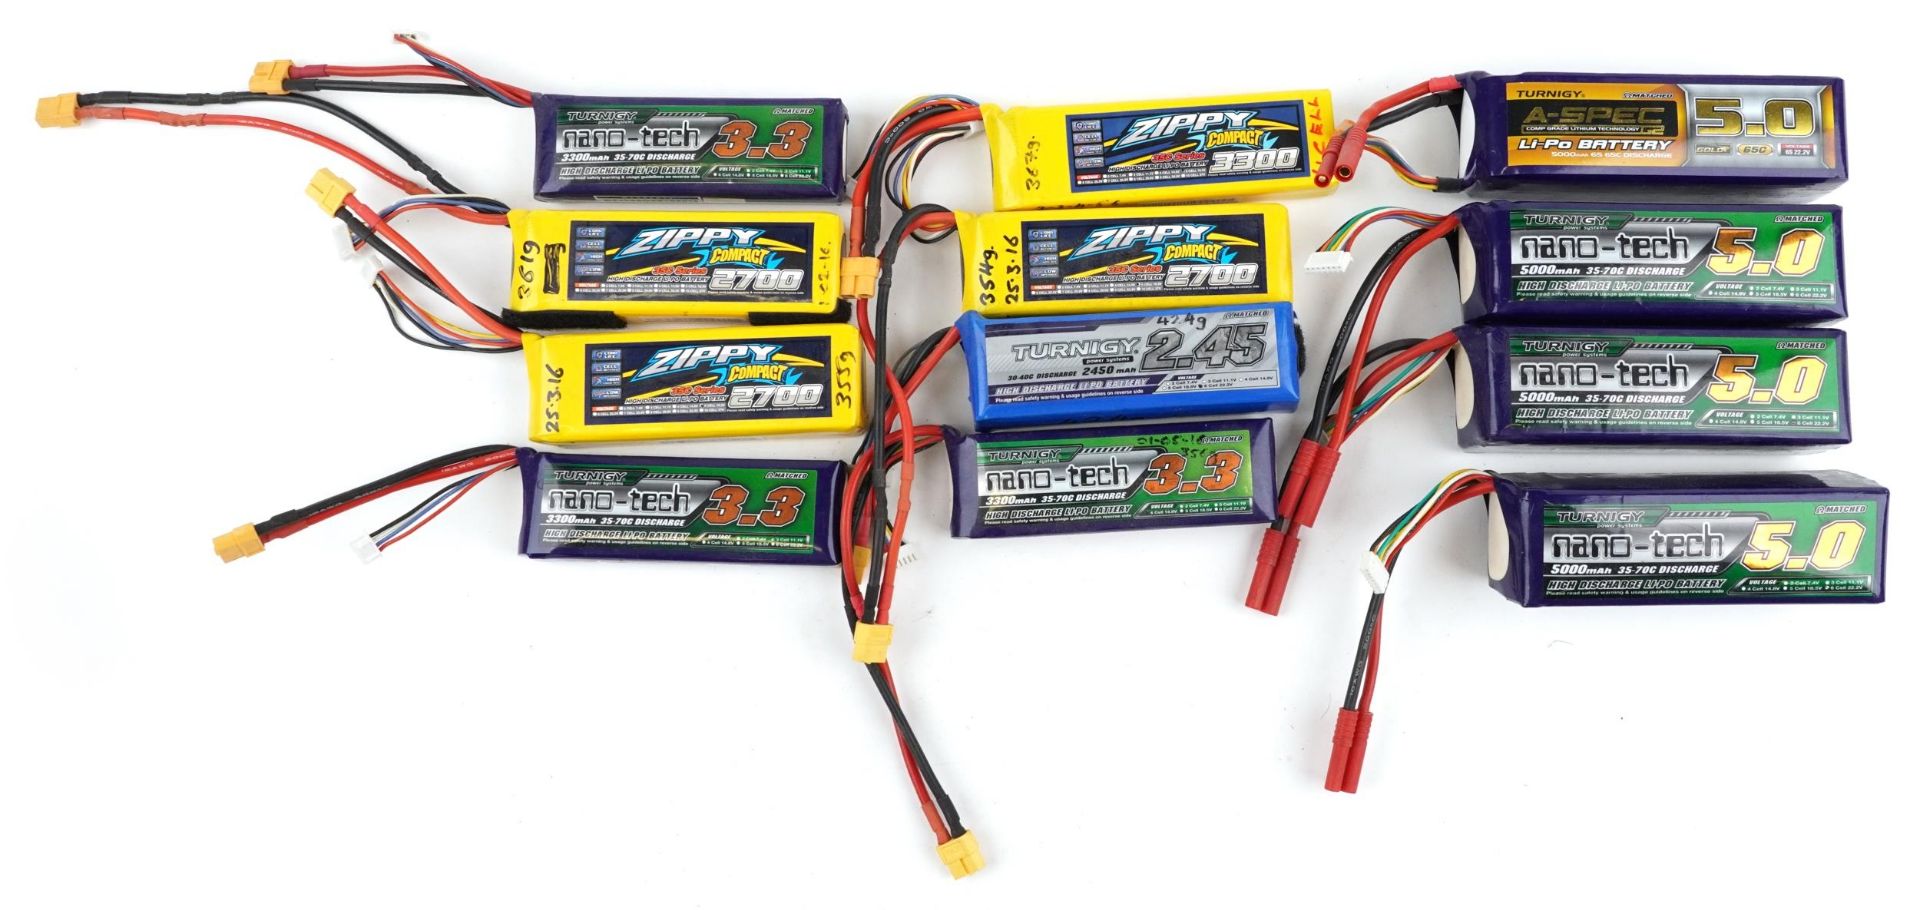 Collection of radio controlled battery packs including Nano-tech and Zippy compact : For further